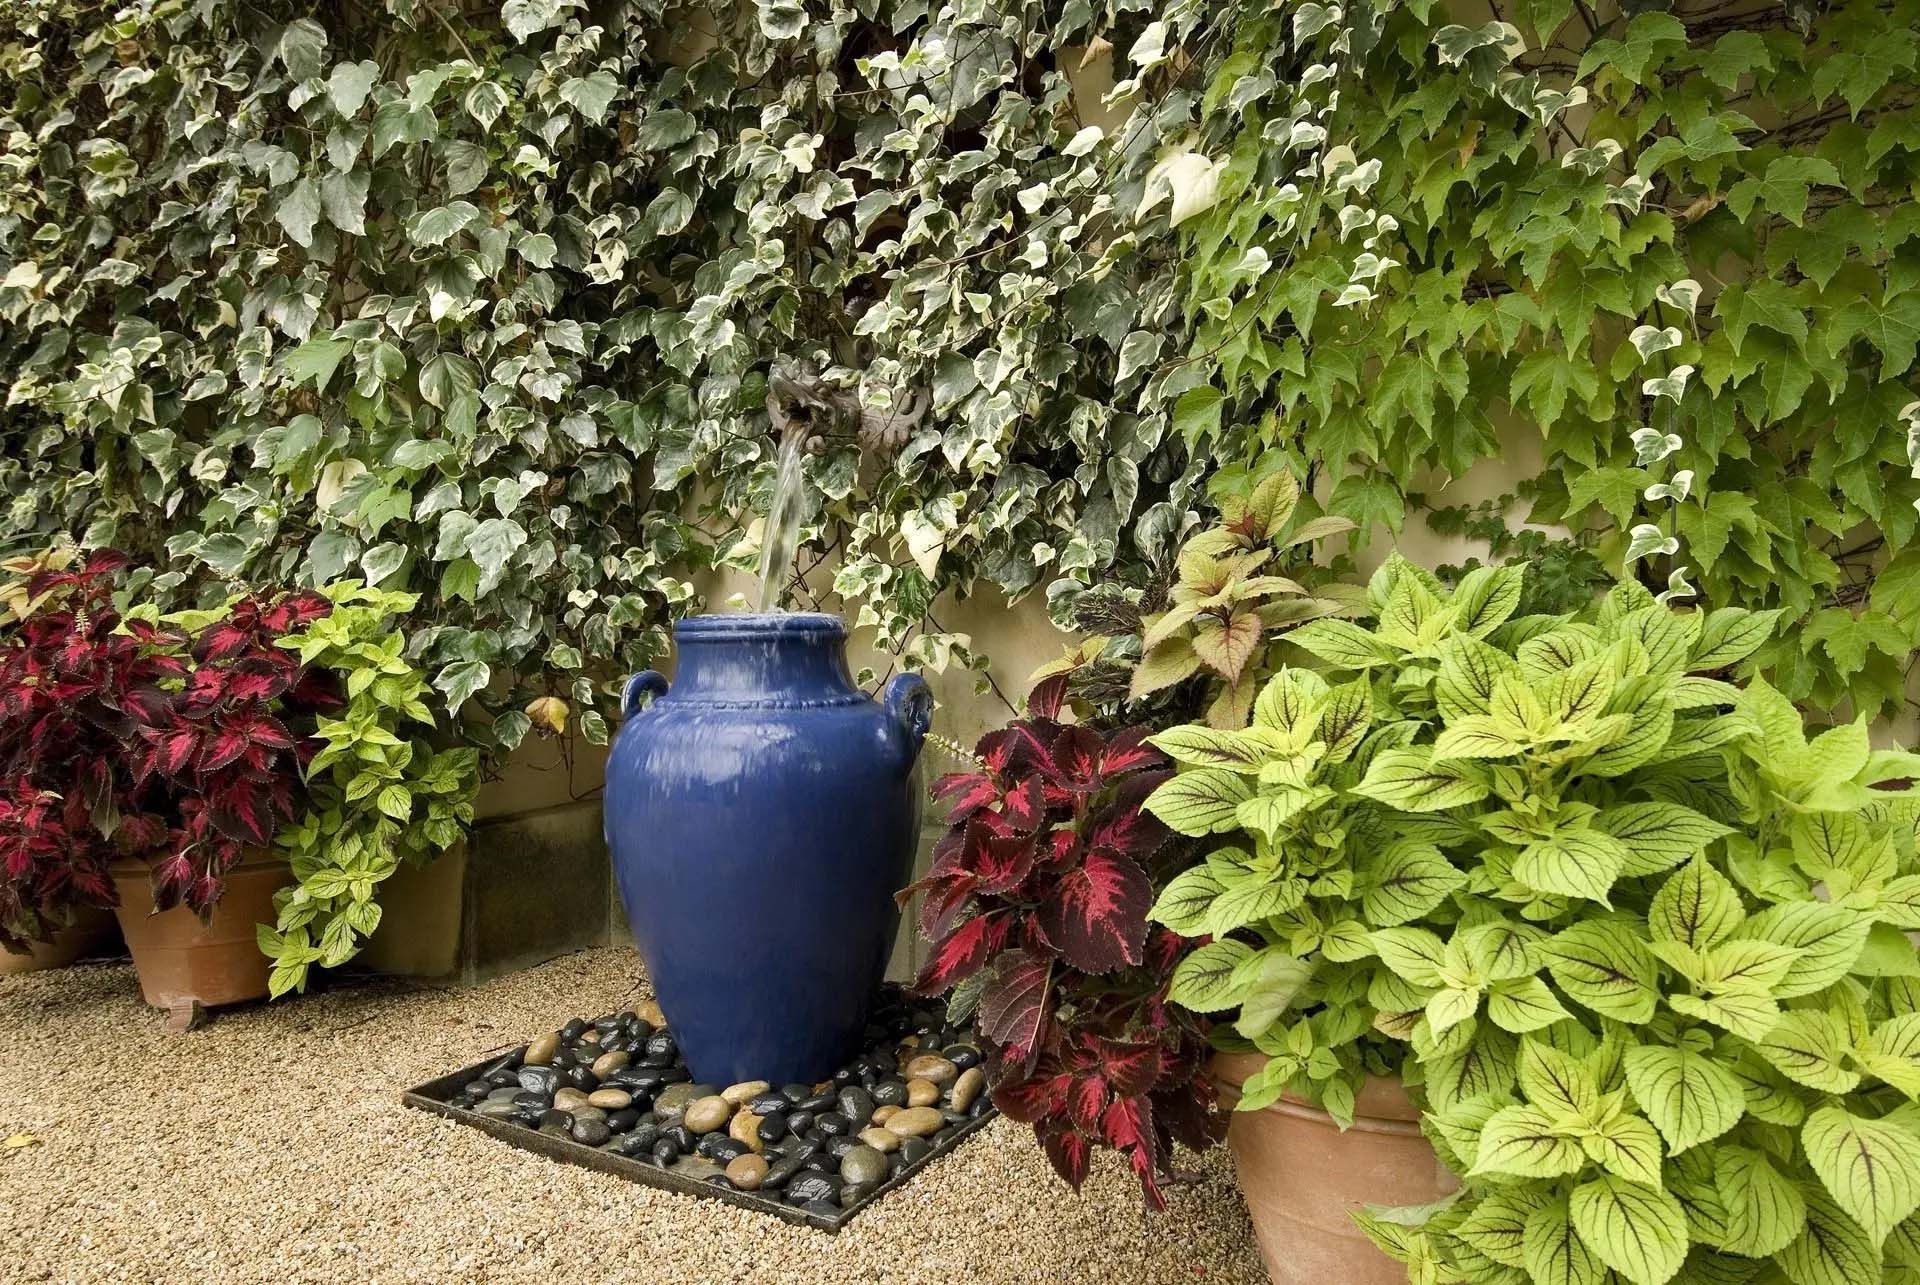 5 Steps To Add Beautiful Climbing Vines to Your Landscape